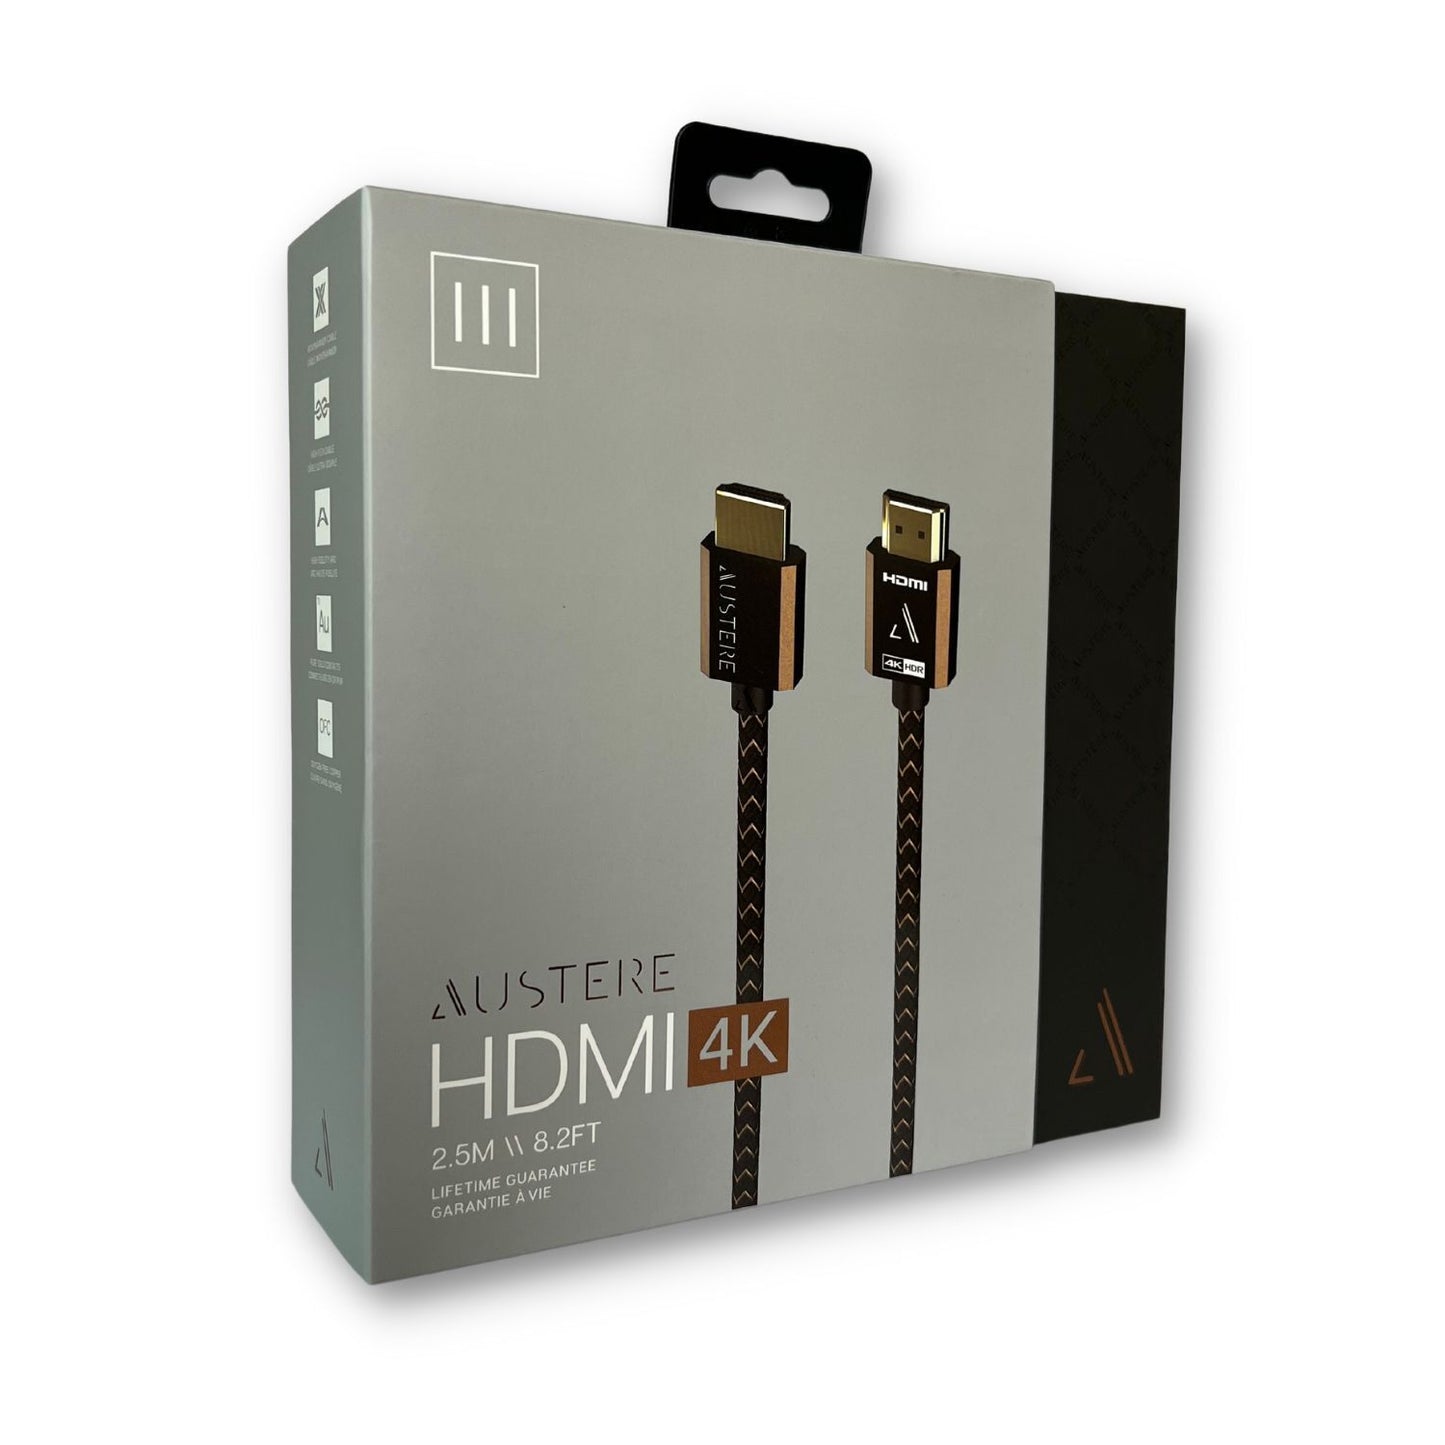 Austere III Series 4K HDMI Cable 2.5m Premium Certified HDMI, 4K HDR, 18Gbps